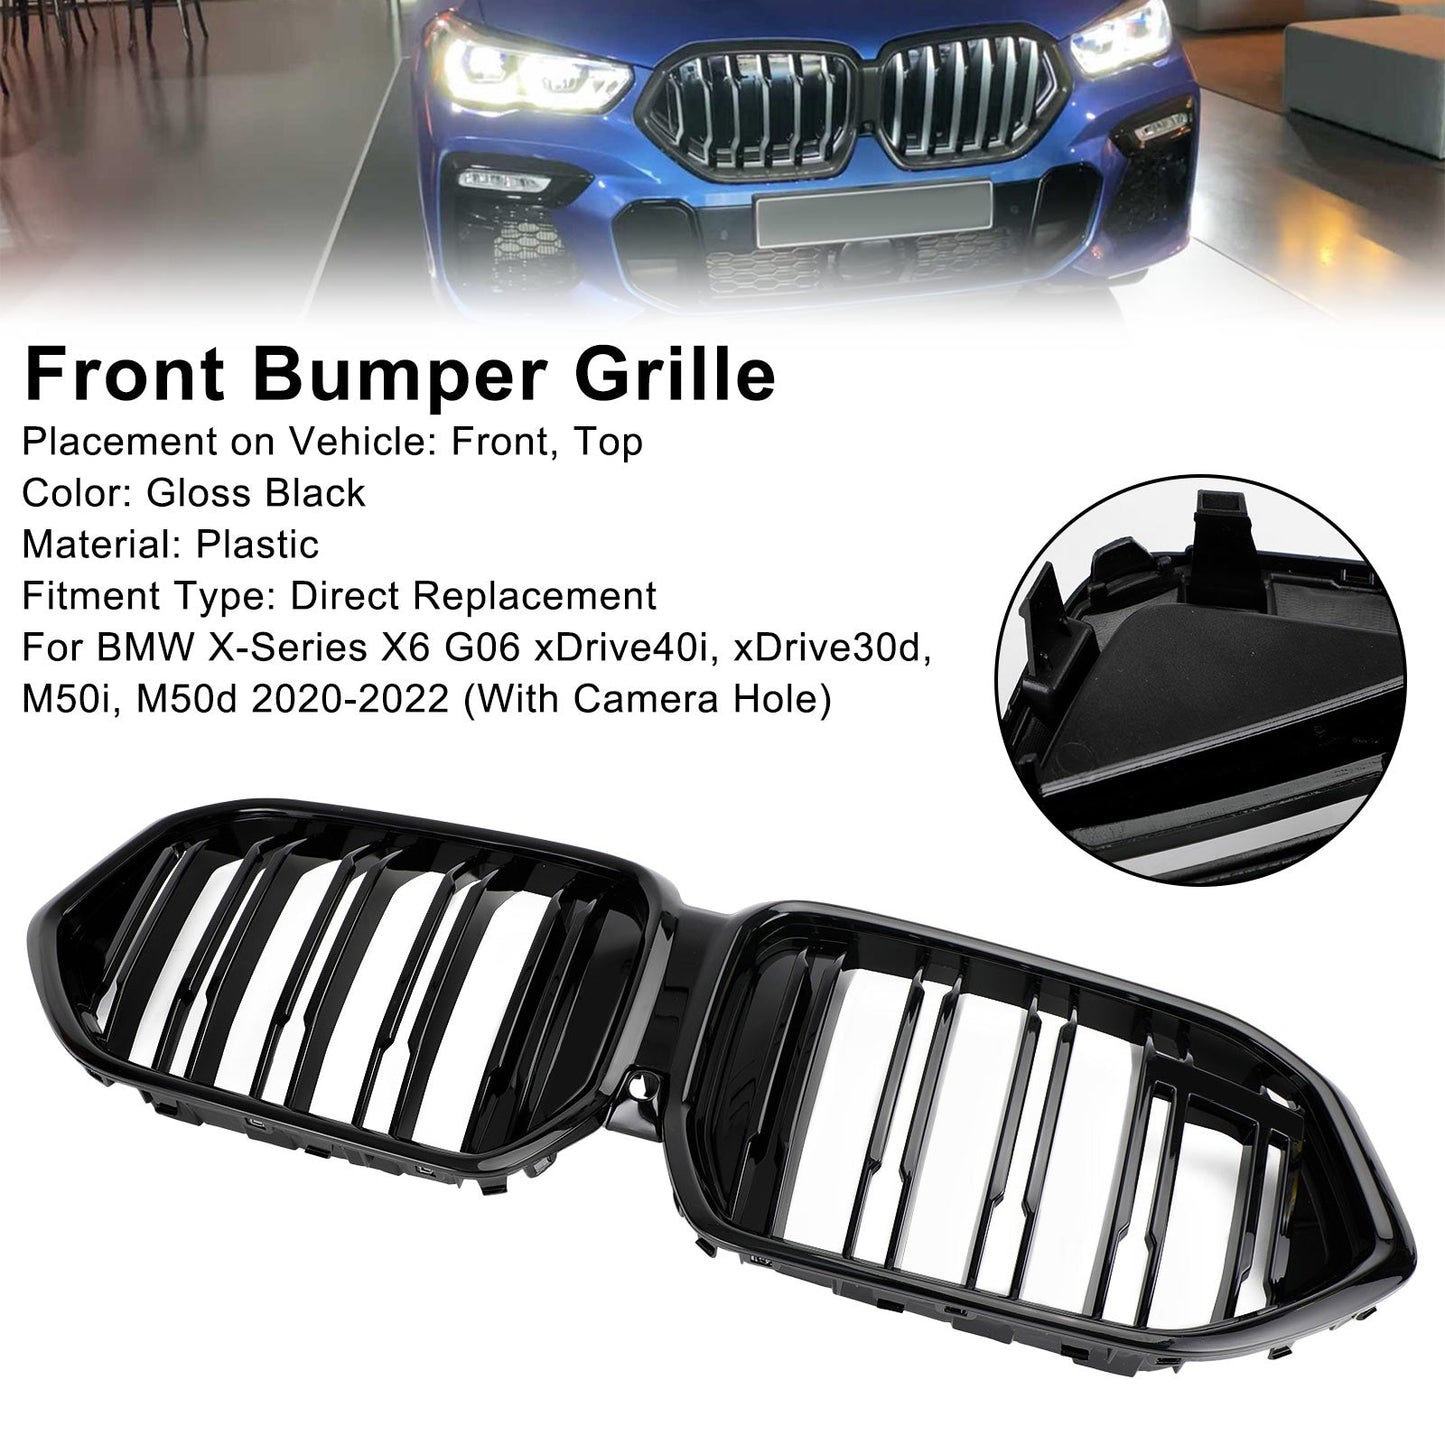 Front Bumper Grille Grill Fit BMW X6 G06 M50i 2020-2022 W/Camera Hole Black